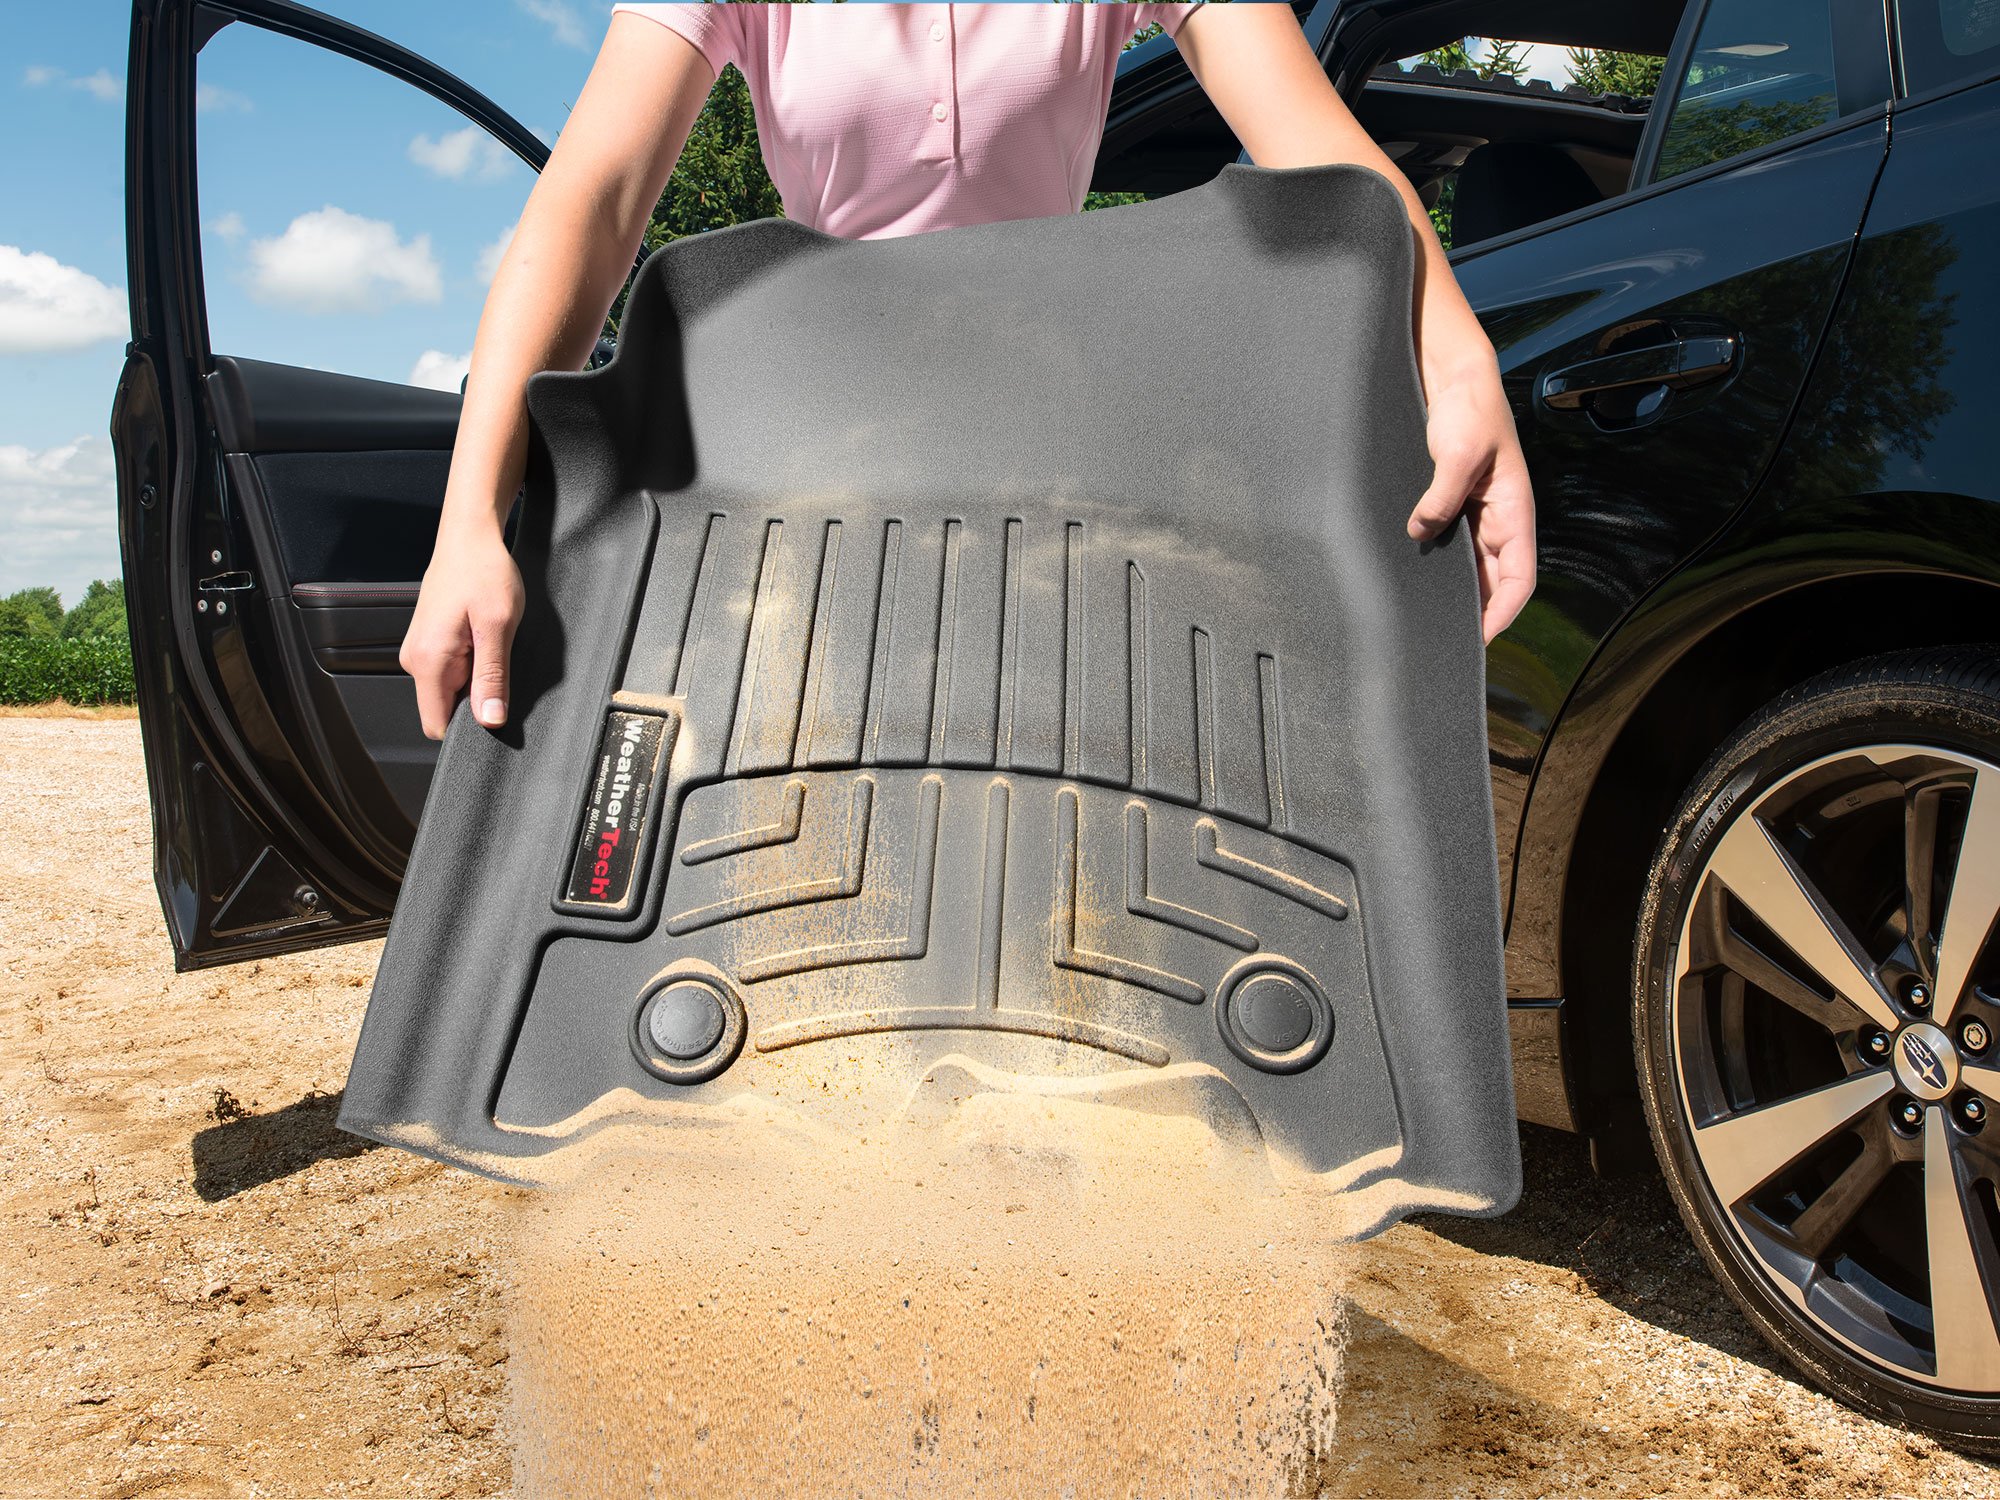 WeatherTech on X: Feel like you brought the whole #beach home